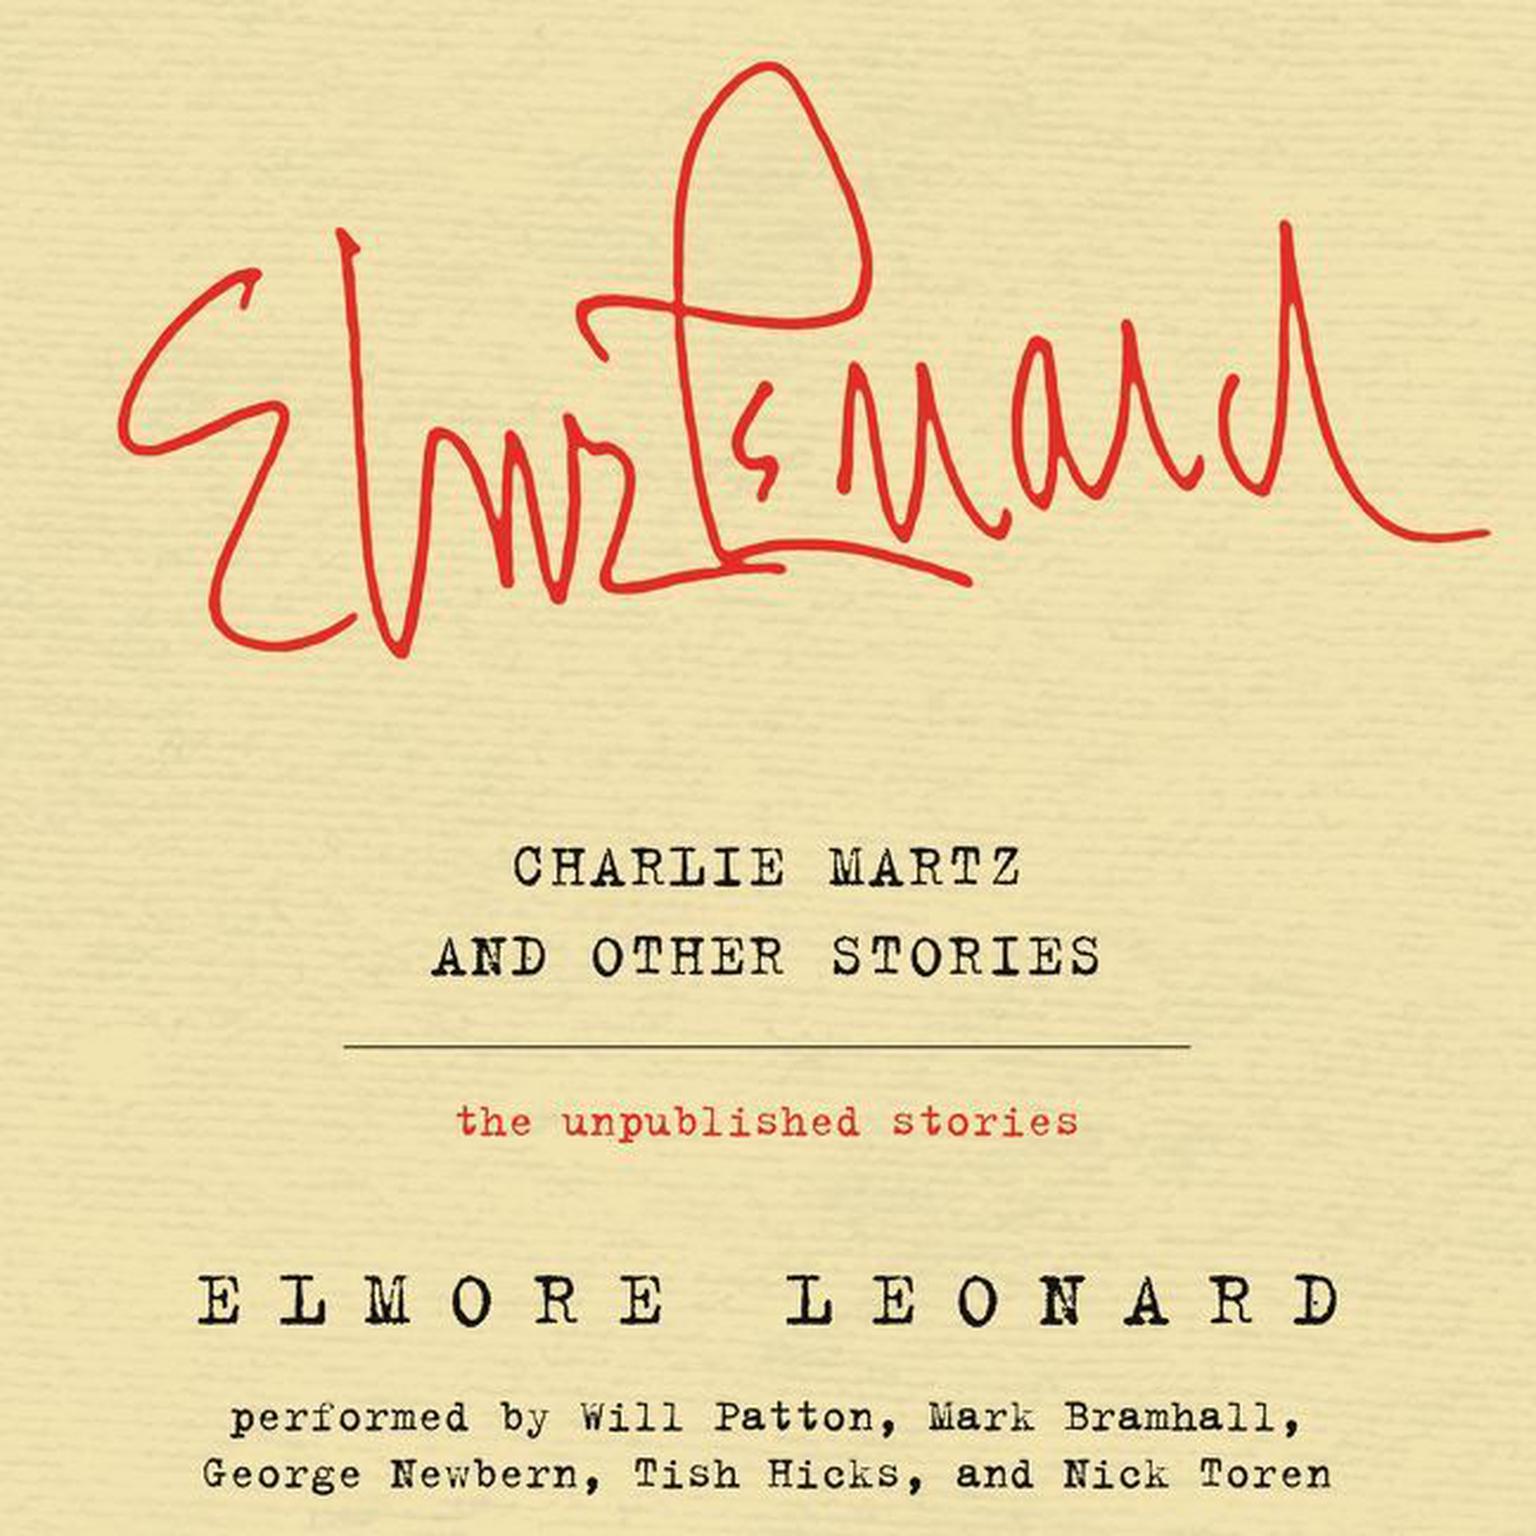 Charlie Martz and Other Stories: The Unpublished Stories Audiobook, by Elmore Leonard